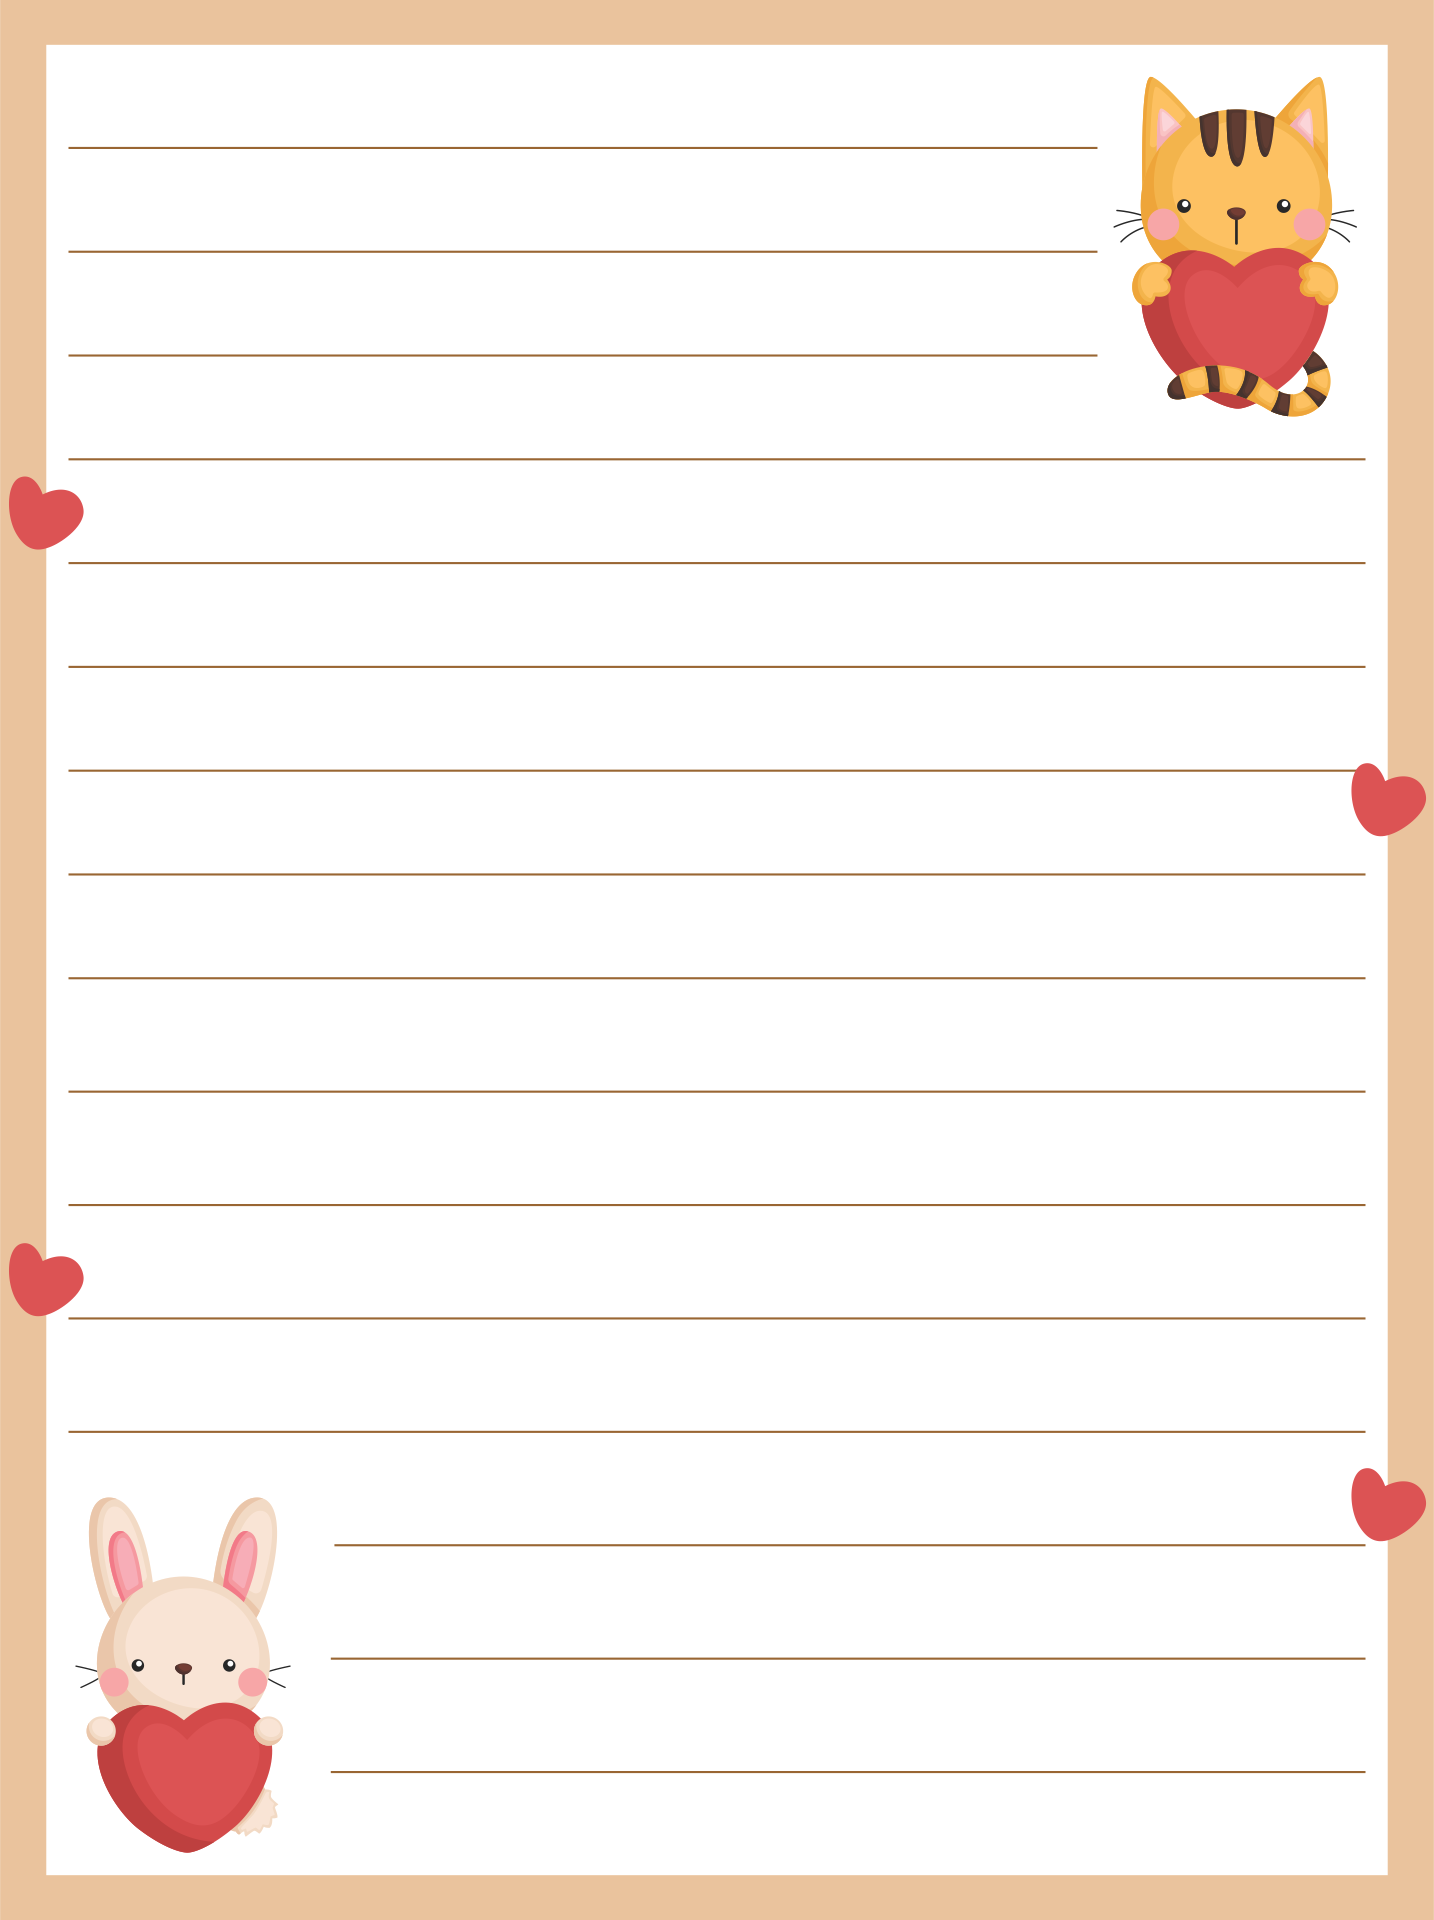 8 Best Images of Printable Love Letter Stationery - Free Printable ...